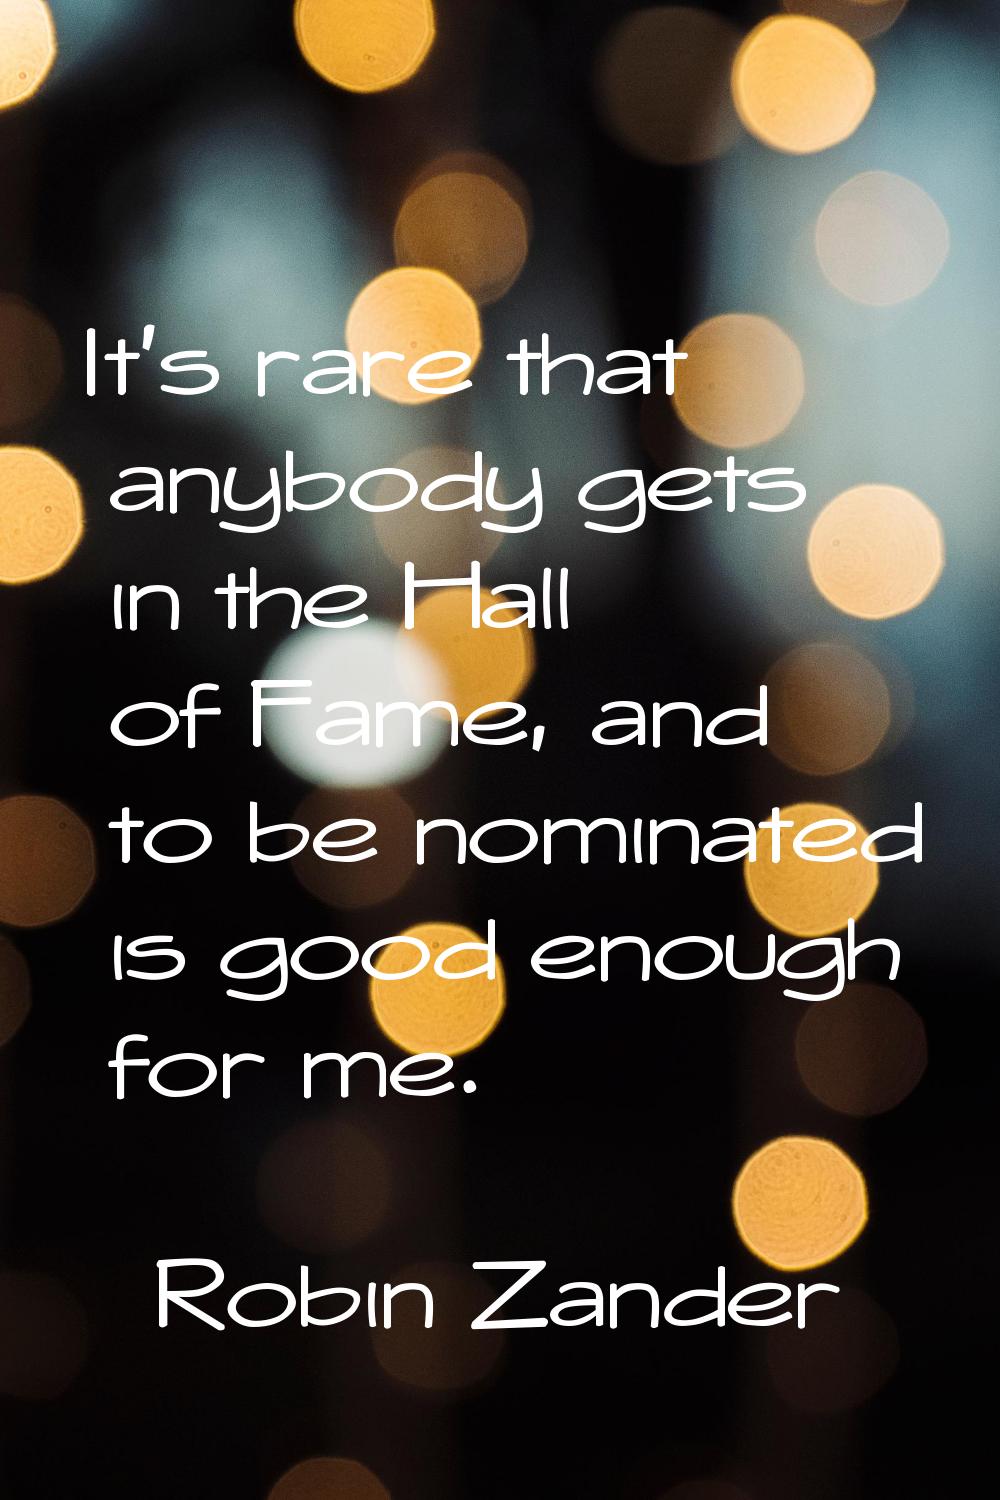 It's rare that anybody gets in the Hall of Fame, and to be nominated is good enough for me.